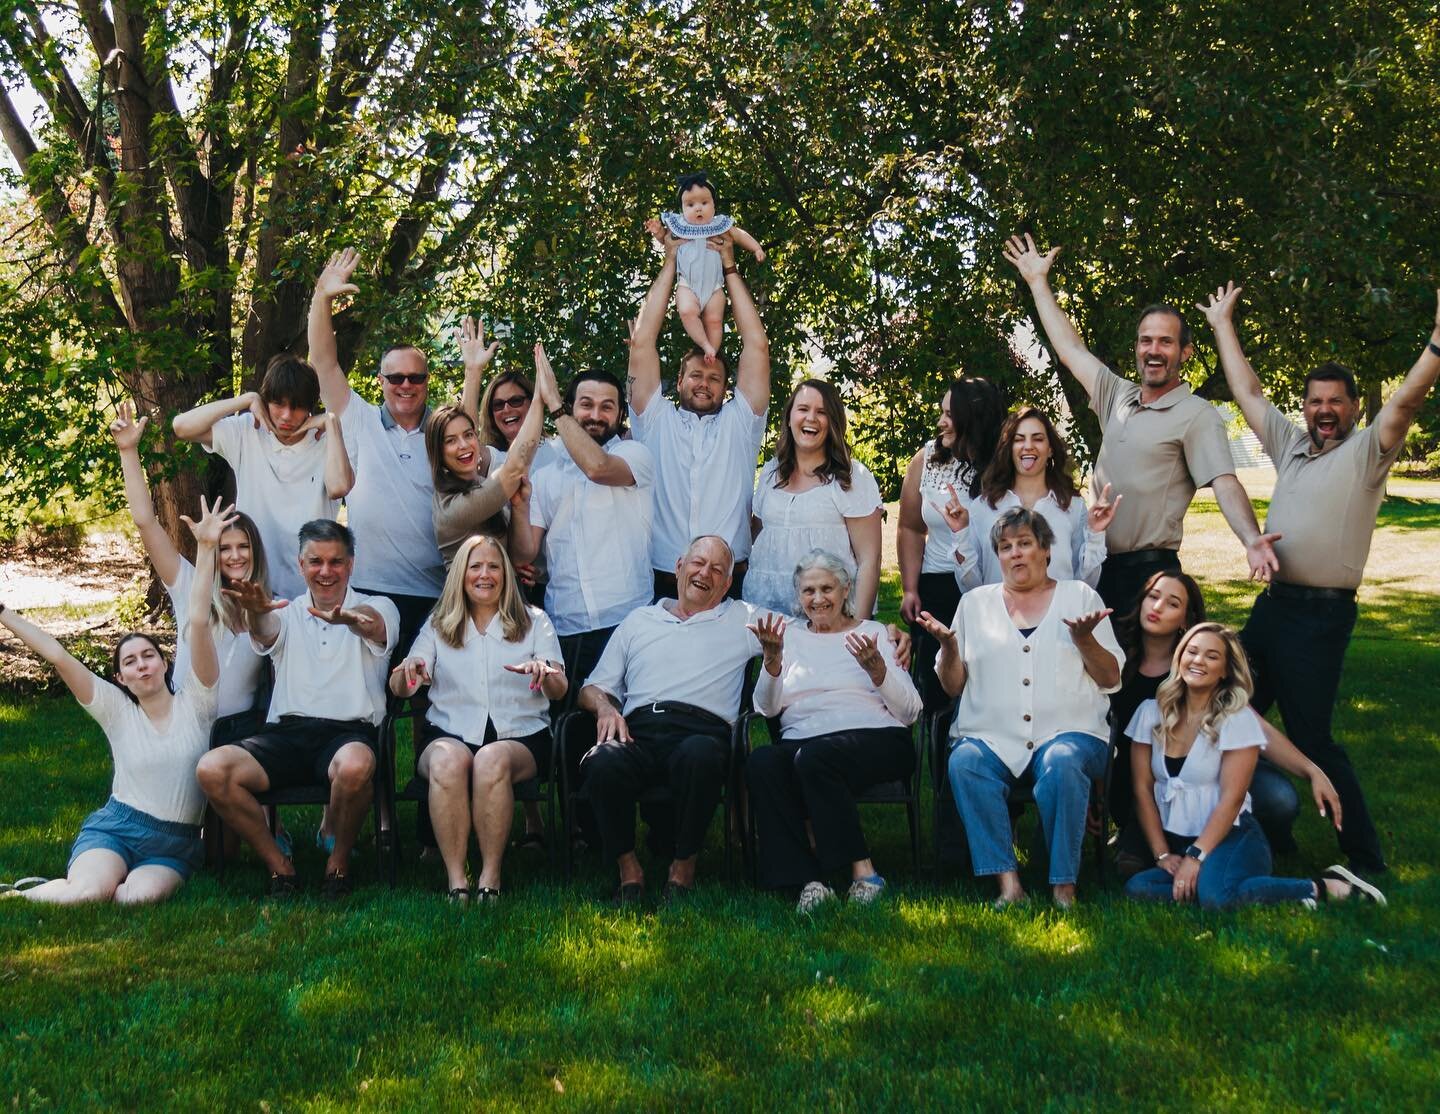 When the whole fam can finally get together again 🙌🙌
.
.
.
.
.
.
.
#familyphotography #familyreunion #extendedfamilyphoto #westmichiganphotographer #westmichiganphotography #grandrapidsmichigan #grandrapidsphotographer #grandrapids #familytime #gat